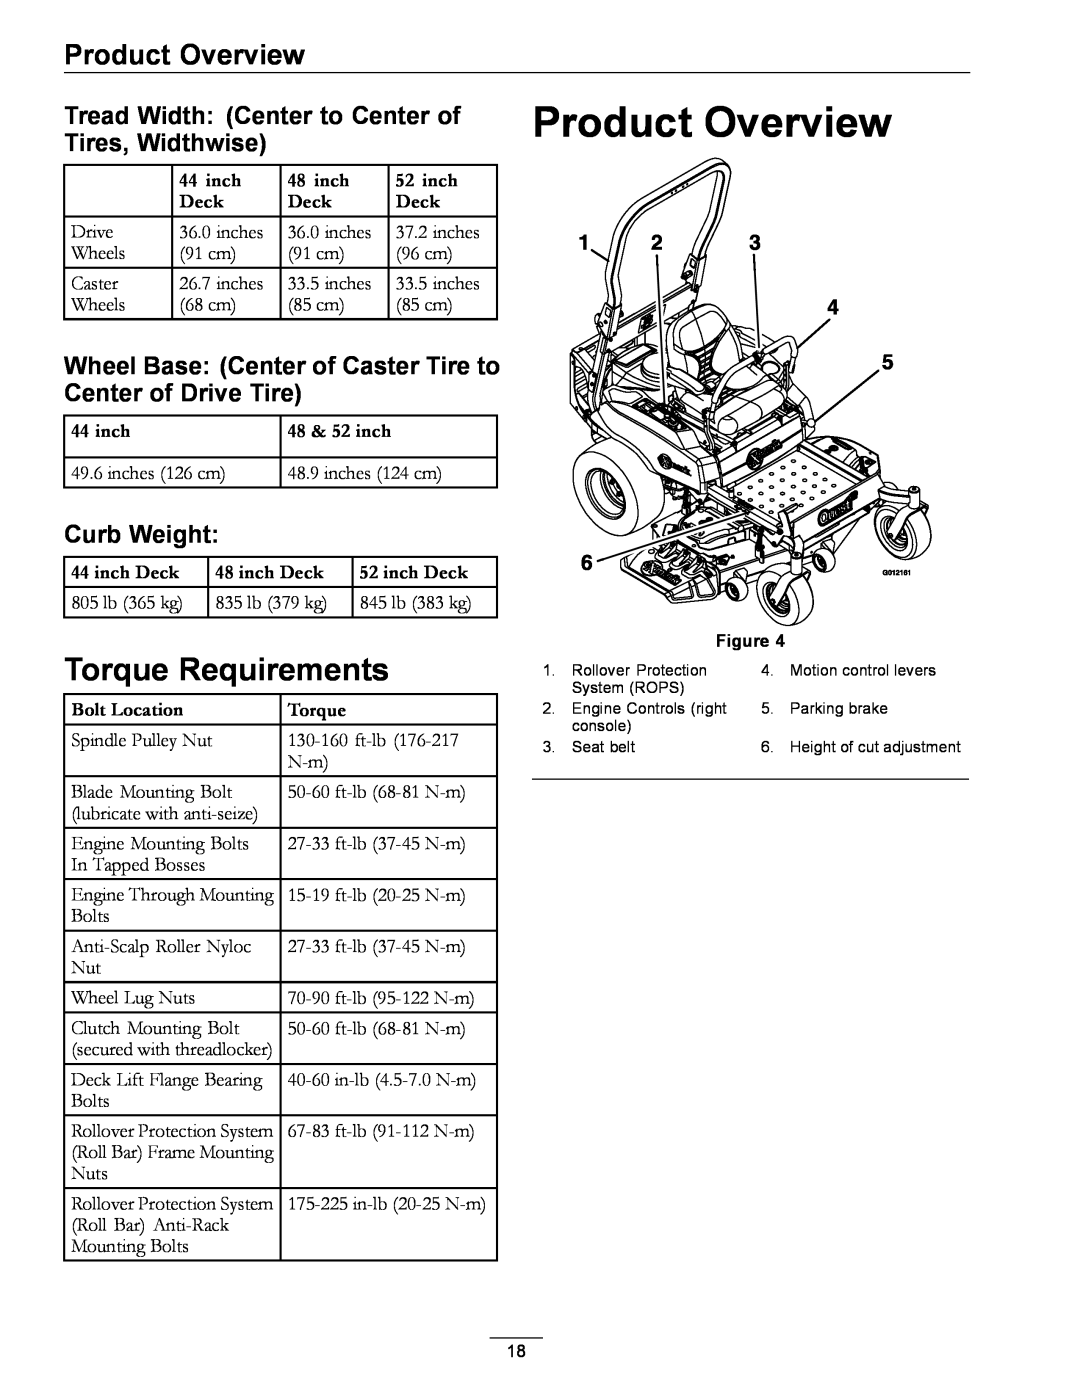 Exmark 850 manual Product Overview, Torque Requirements, Tread Width: Center to Center of Tires, Widthwise, Curb Weight 